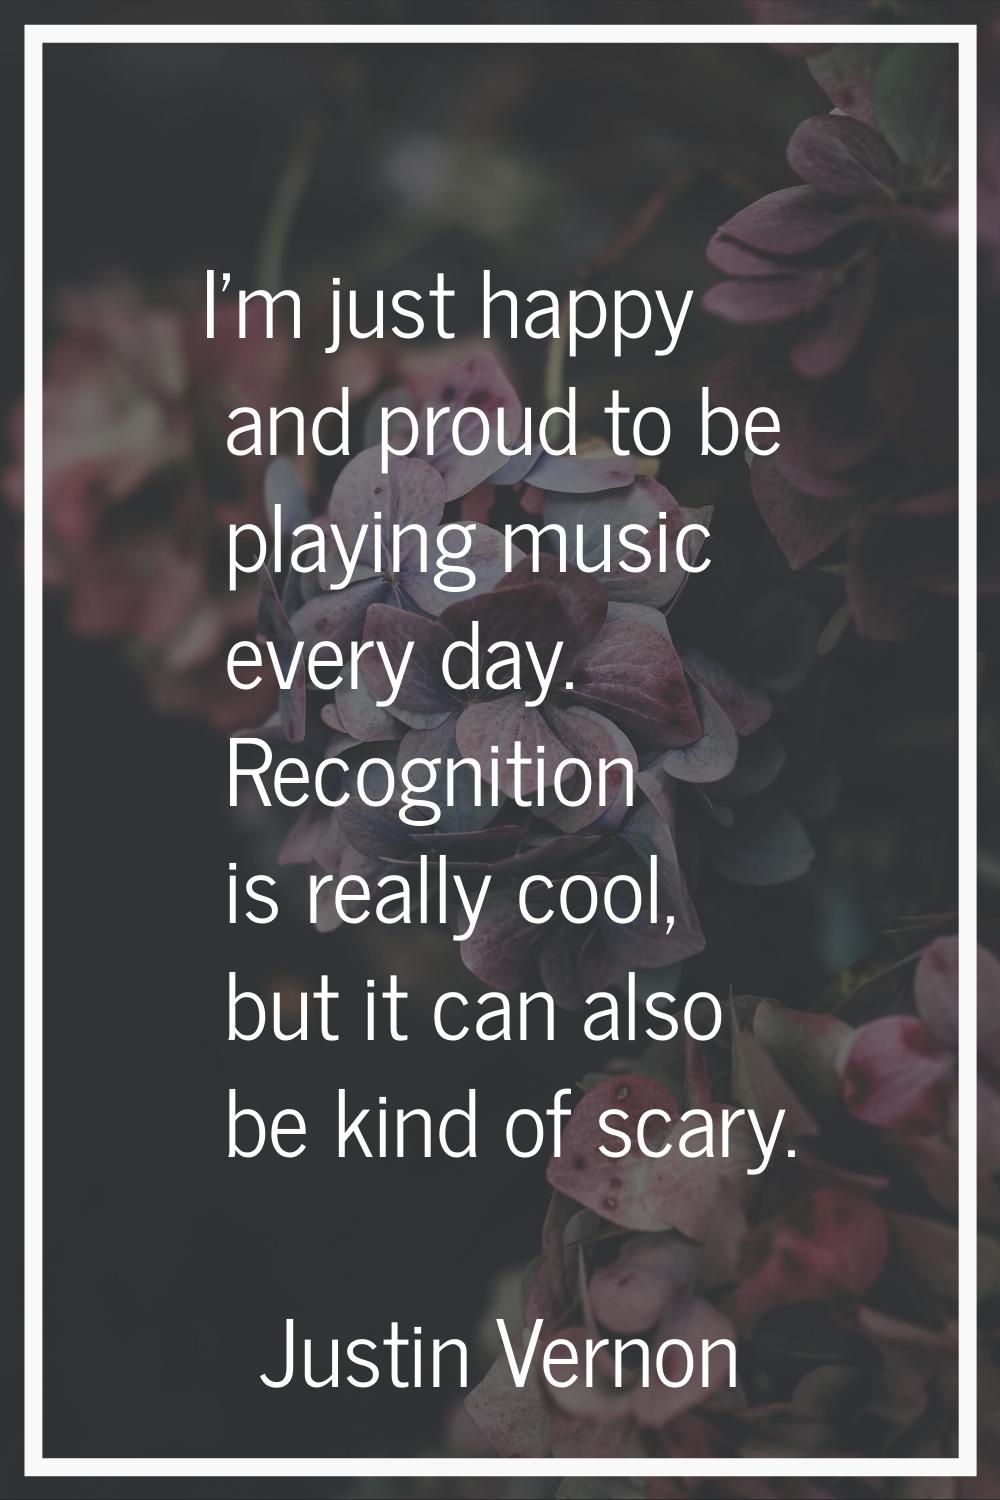 I'm just happy and proud to be playing music every day. Recognition is really cool, but it can also